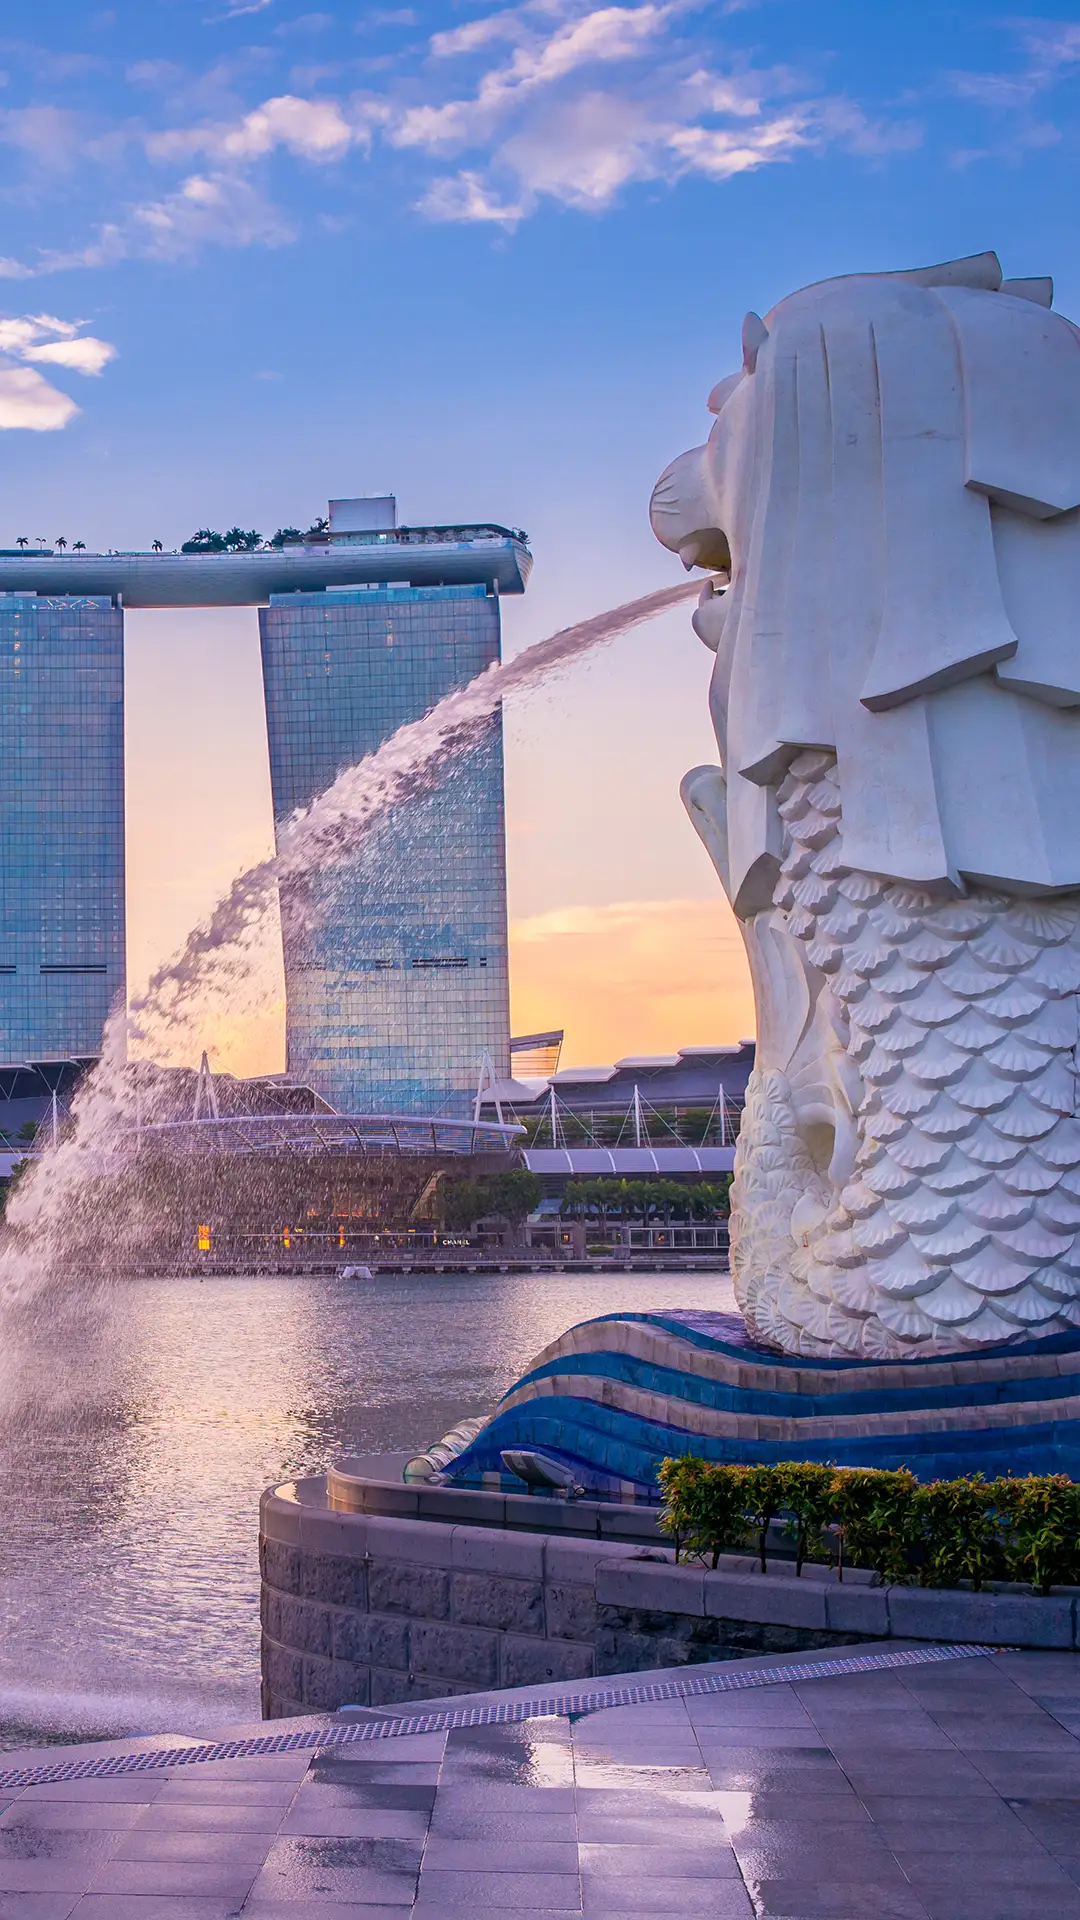 Silhouette of Merlion Statue in Singapore with Marina Bay Sands in the background.